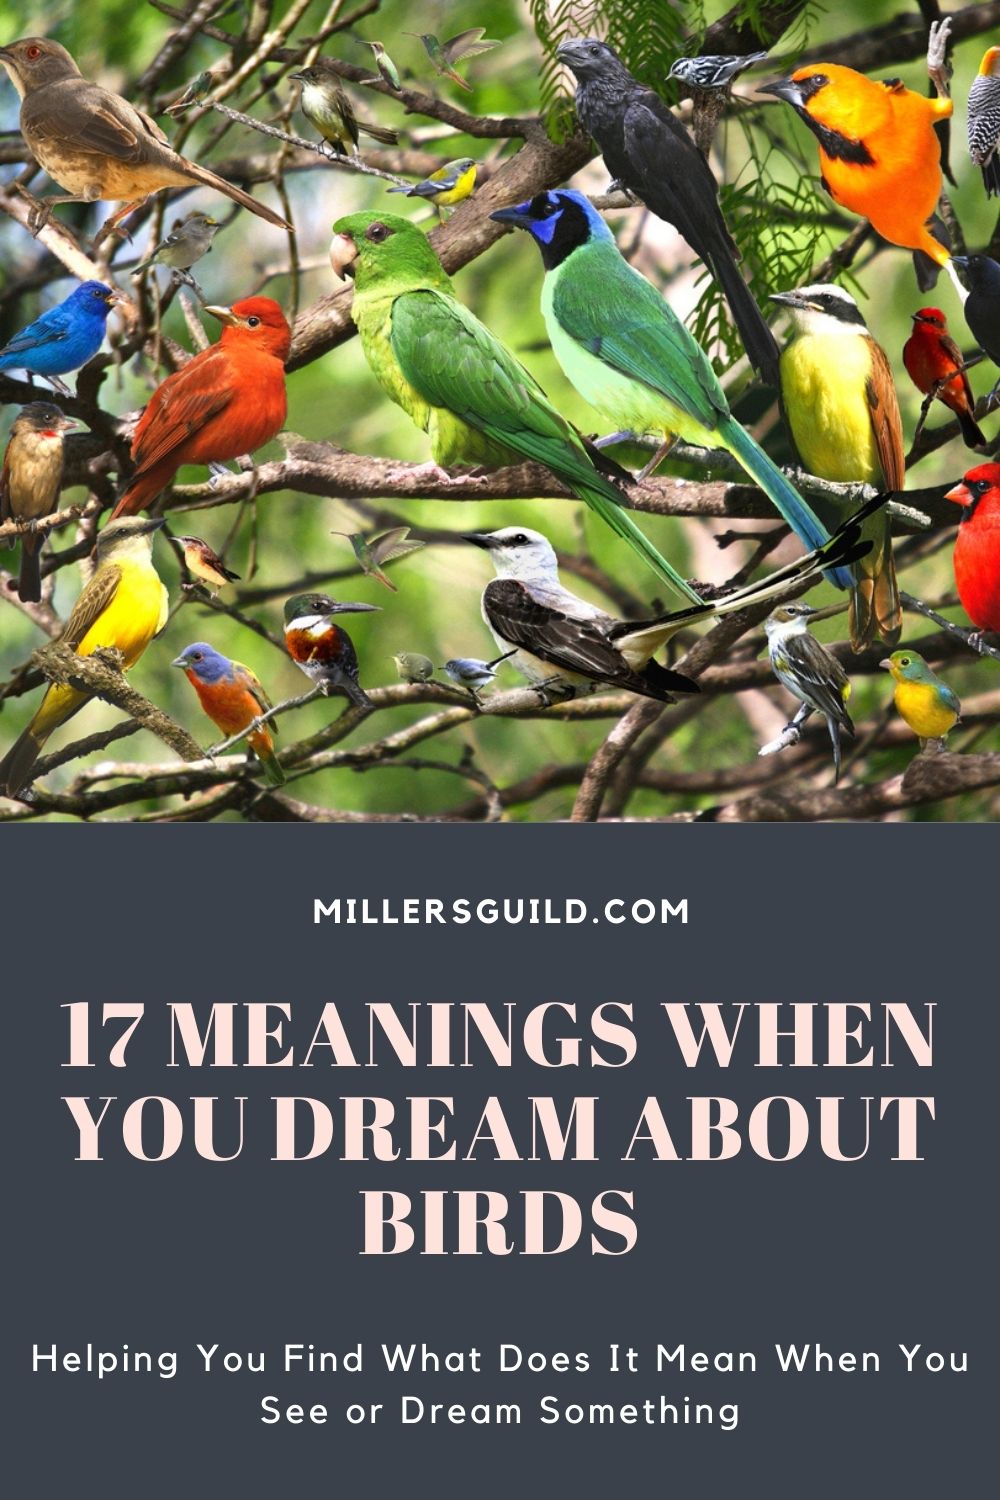 17 Meanings When You Dream About Birds